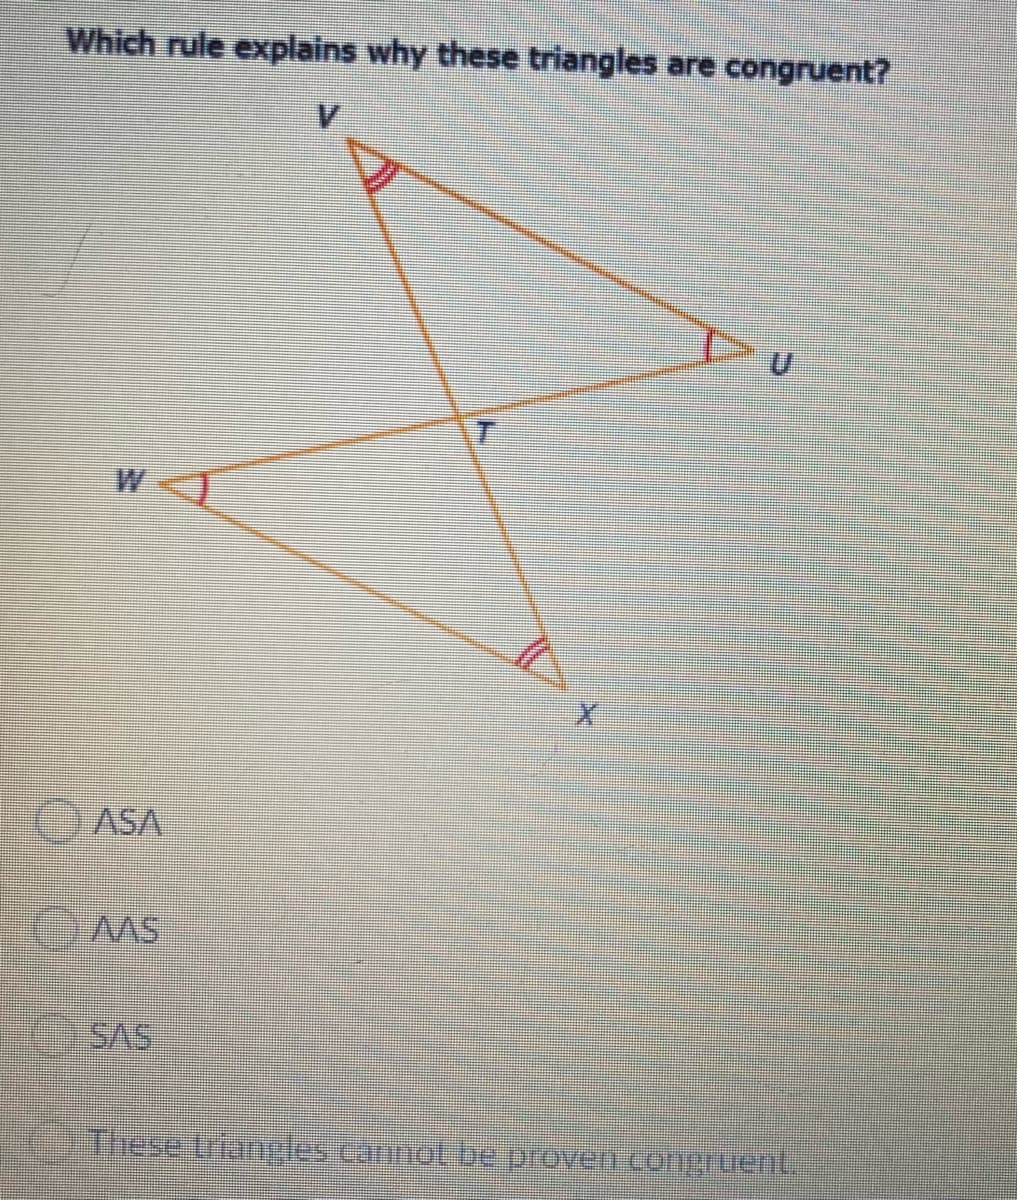 Which rule explains why these triangles are congruent?
W
ASA
These triangles cannol bee proven conpHuent
